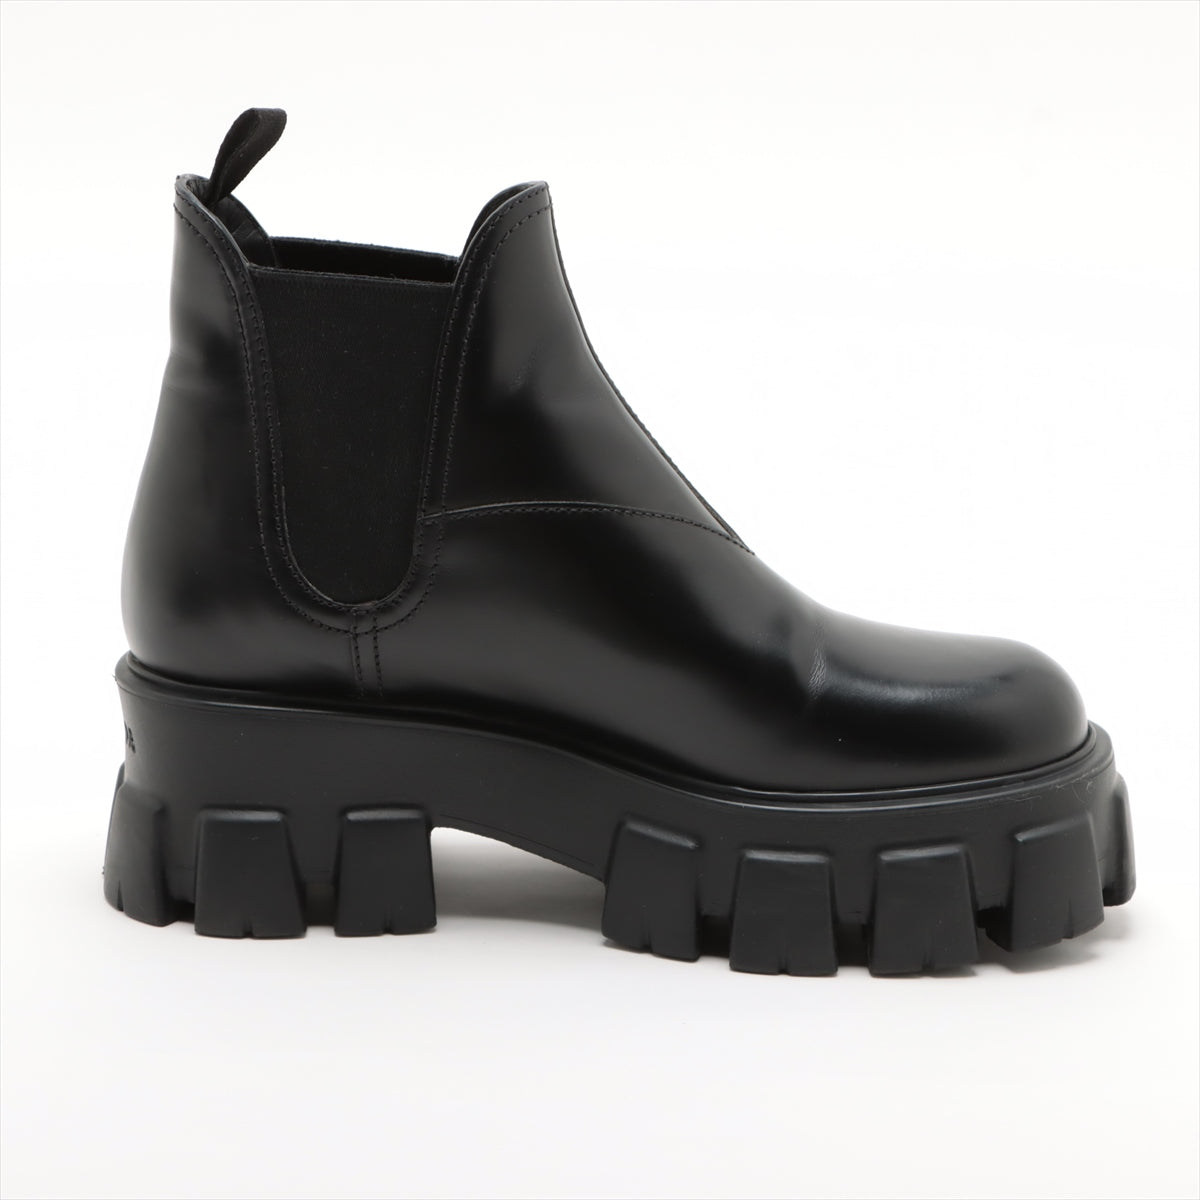 Prada Monolith brushed leather Side Gore Boots 36 Ladies' Black 725 chelsea boots There is a storage bag